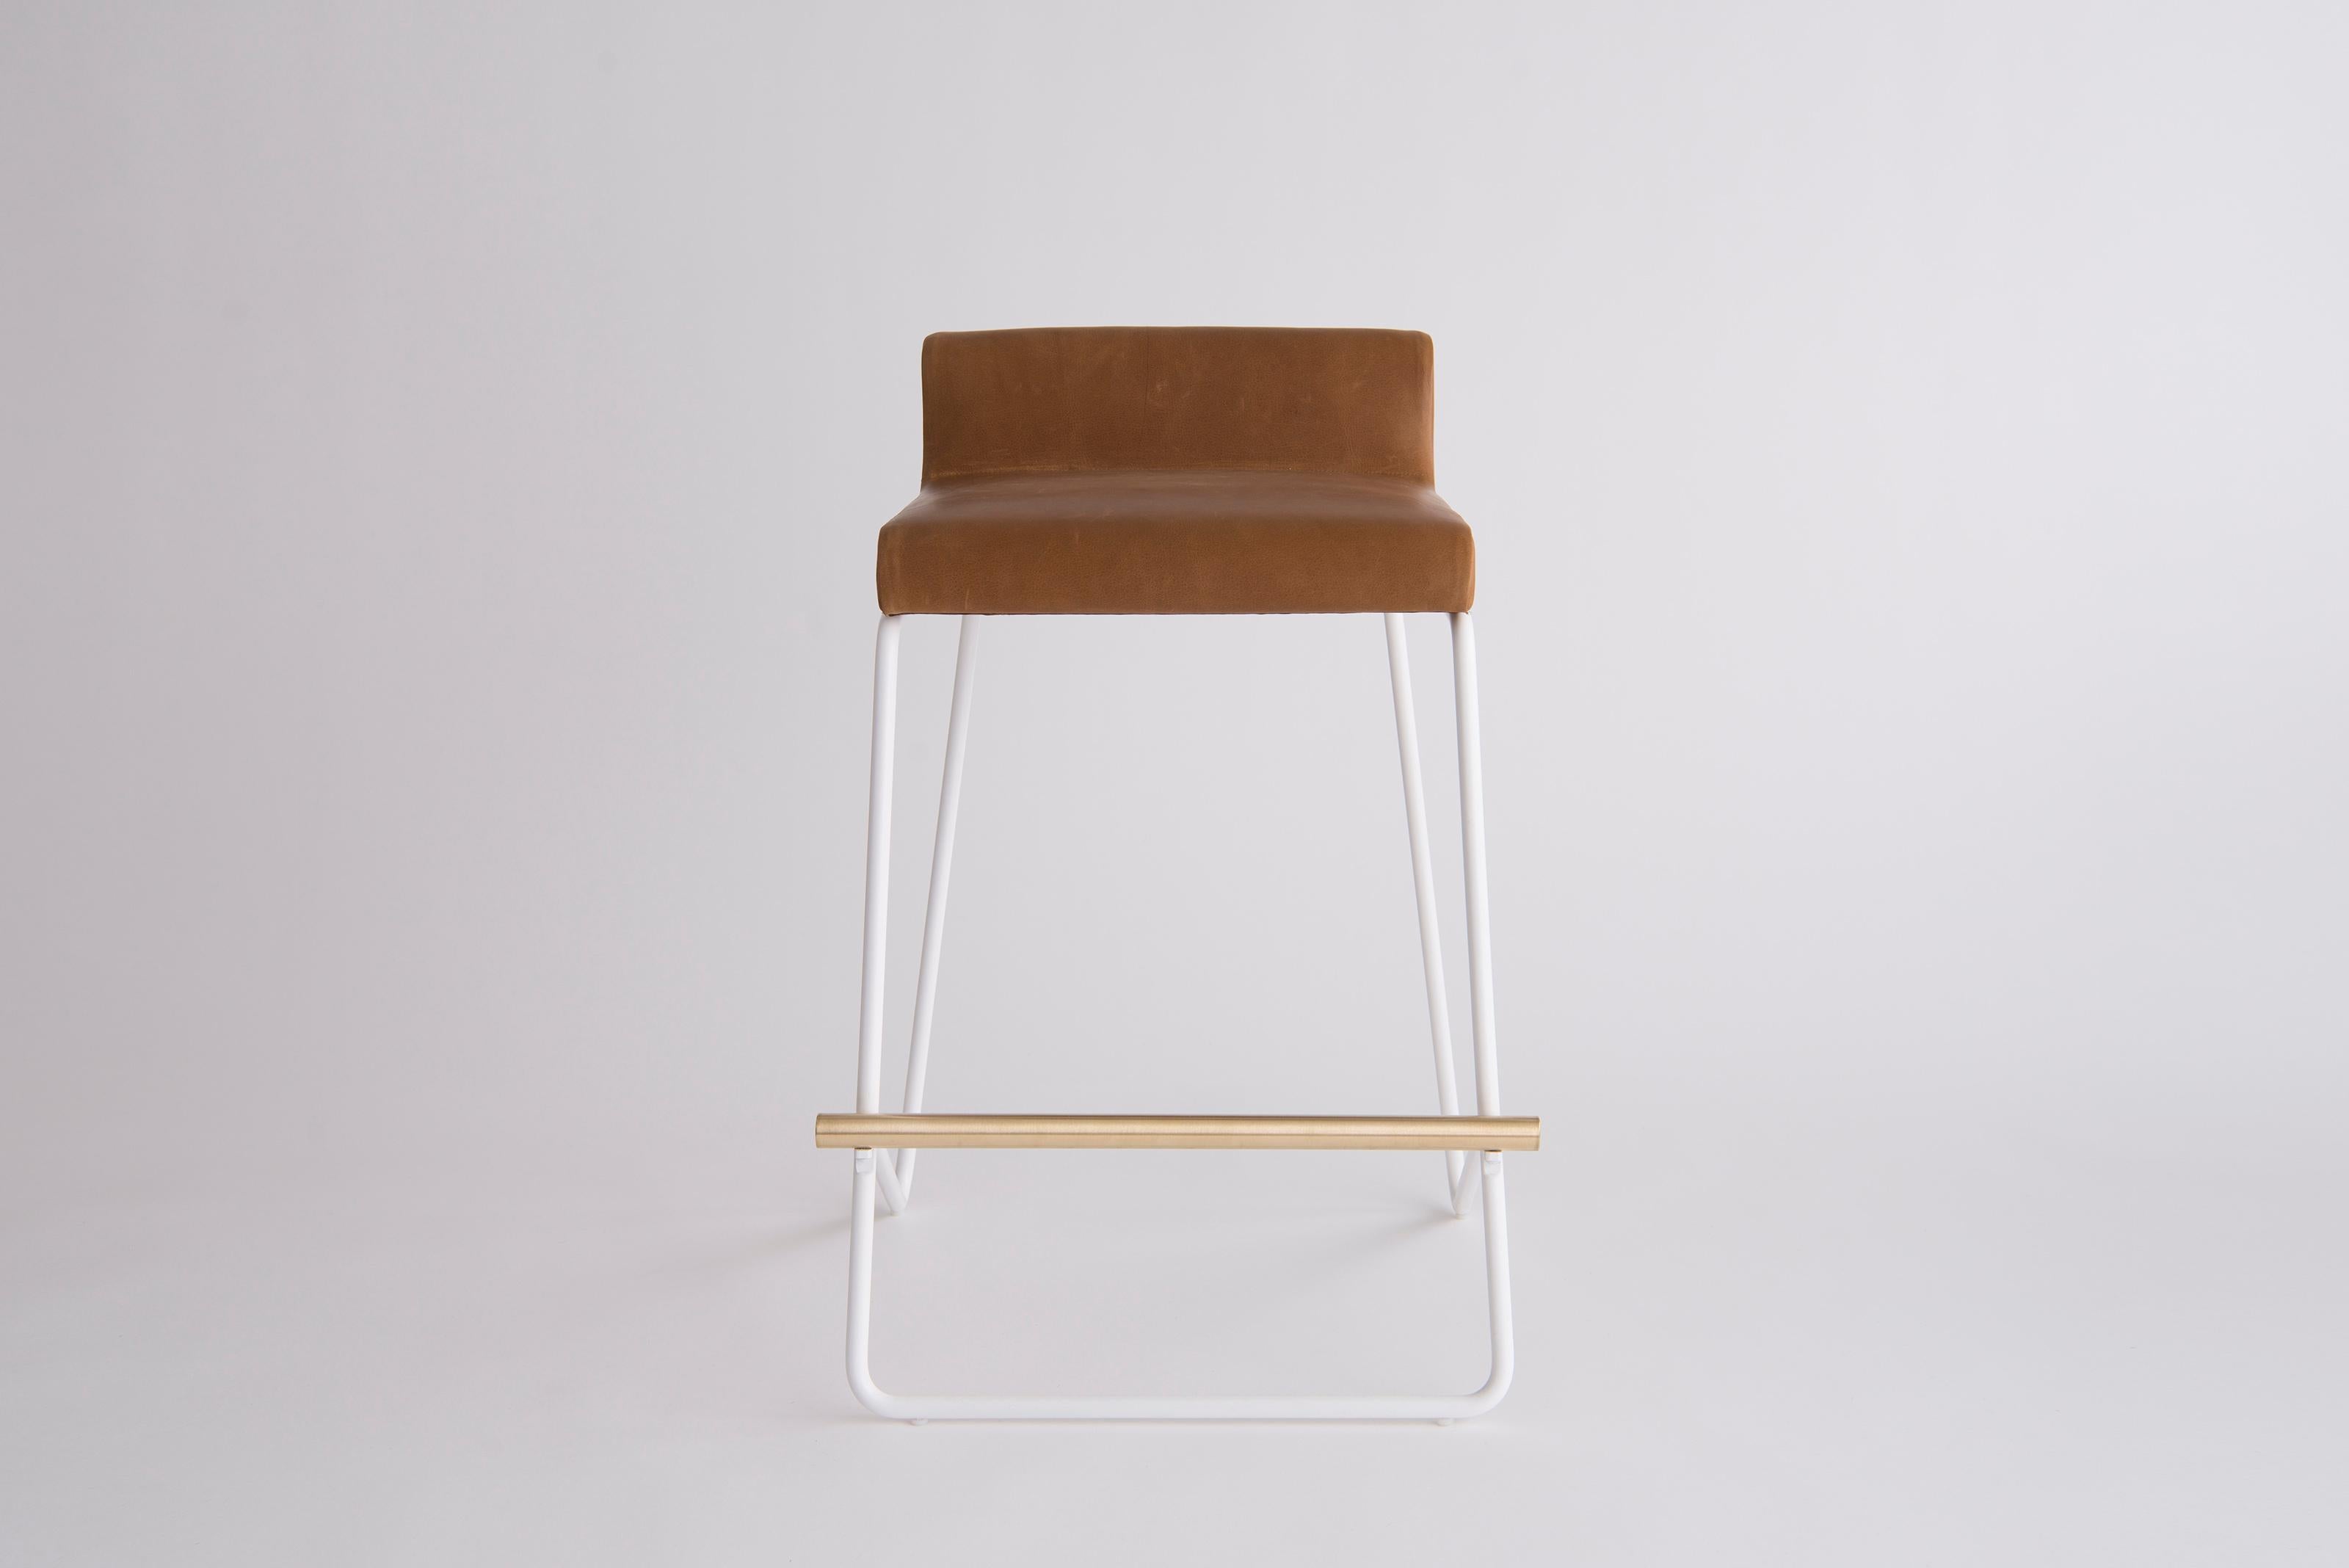 Kickstand Counter Stool by Phase Design
Dimensions: D 57.2 x W 52.7 x H 76.2 cm. 
Materials: Leather, powder-coated metal and brushed brass.

Solid steel bar available in a flat black or white powder coat finish with solid brushed brass bar and